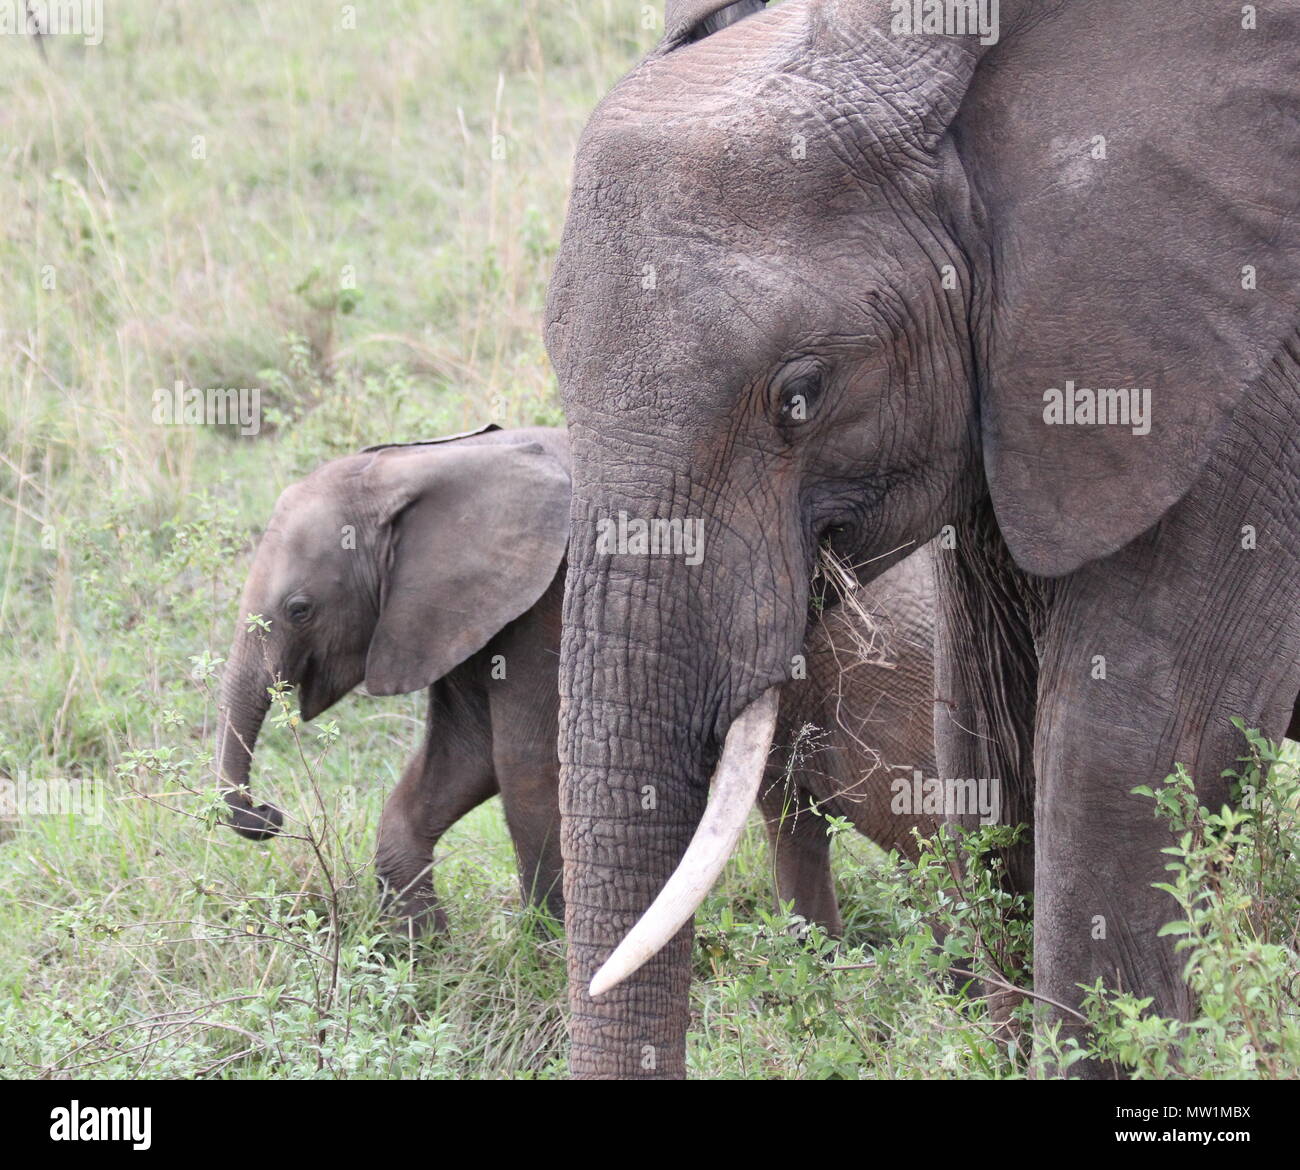 Elephant with young close to her Stock Photo